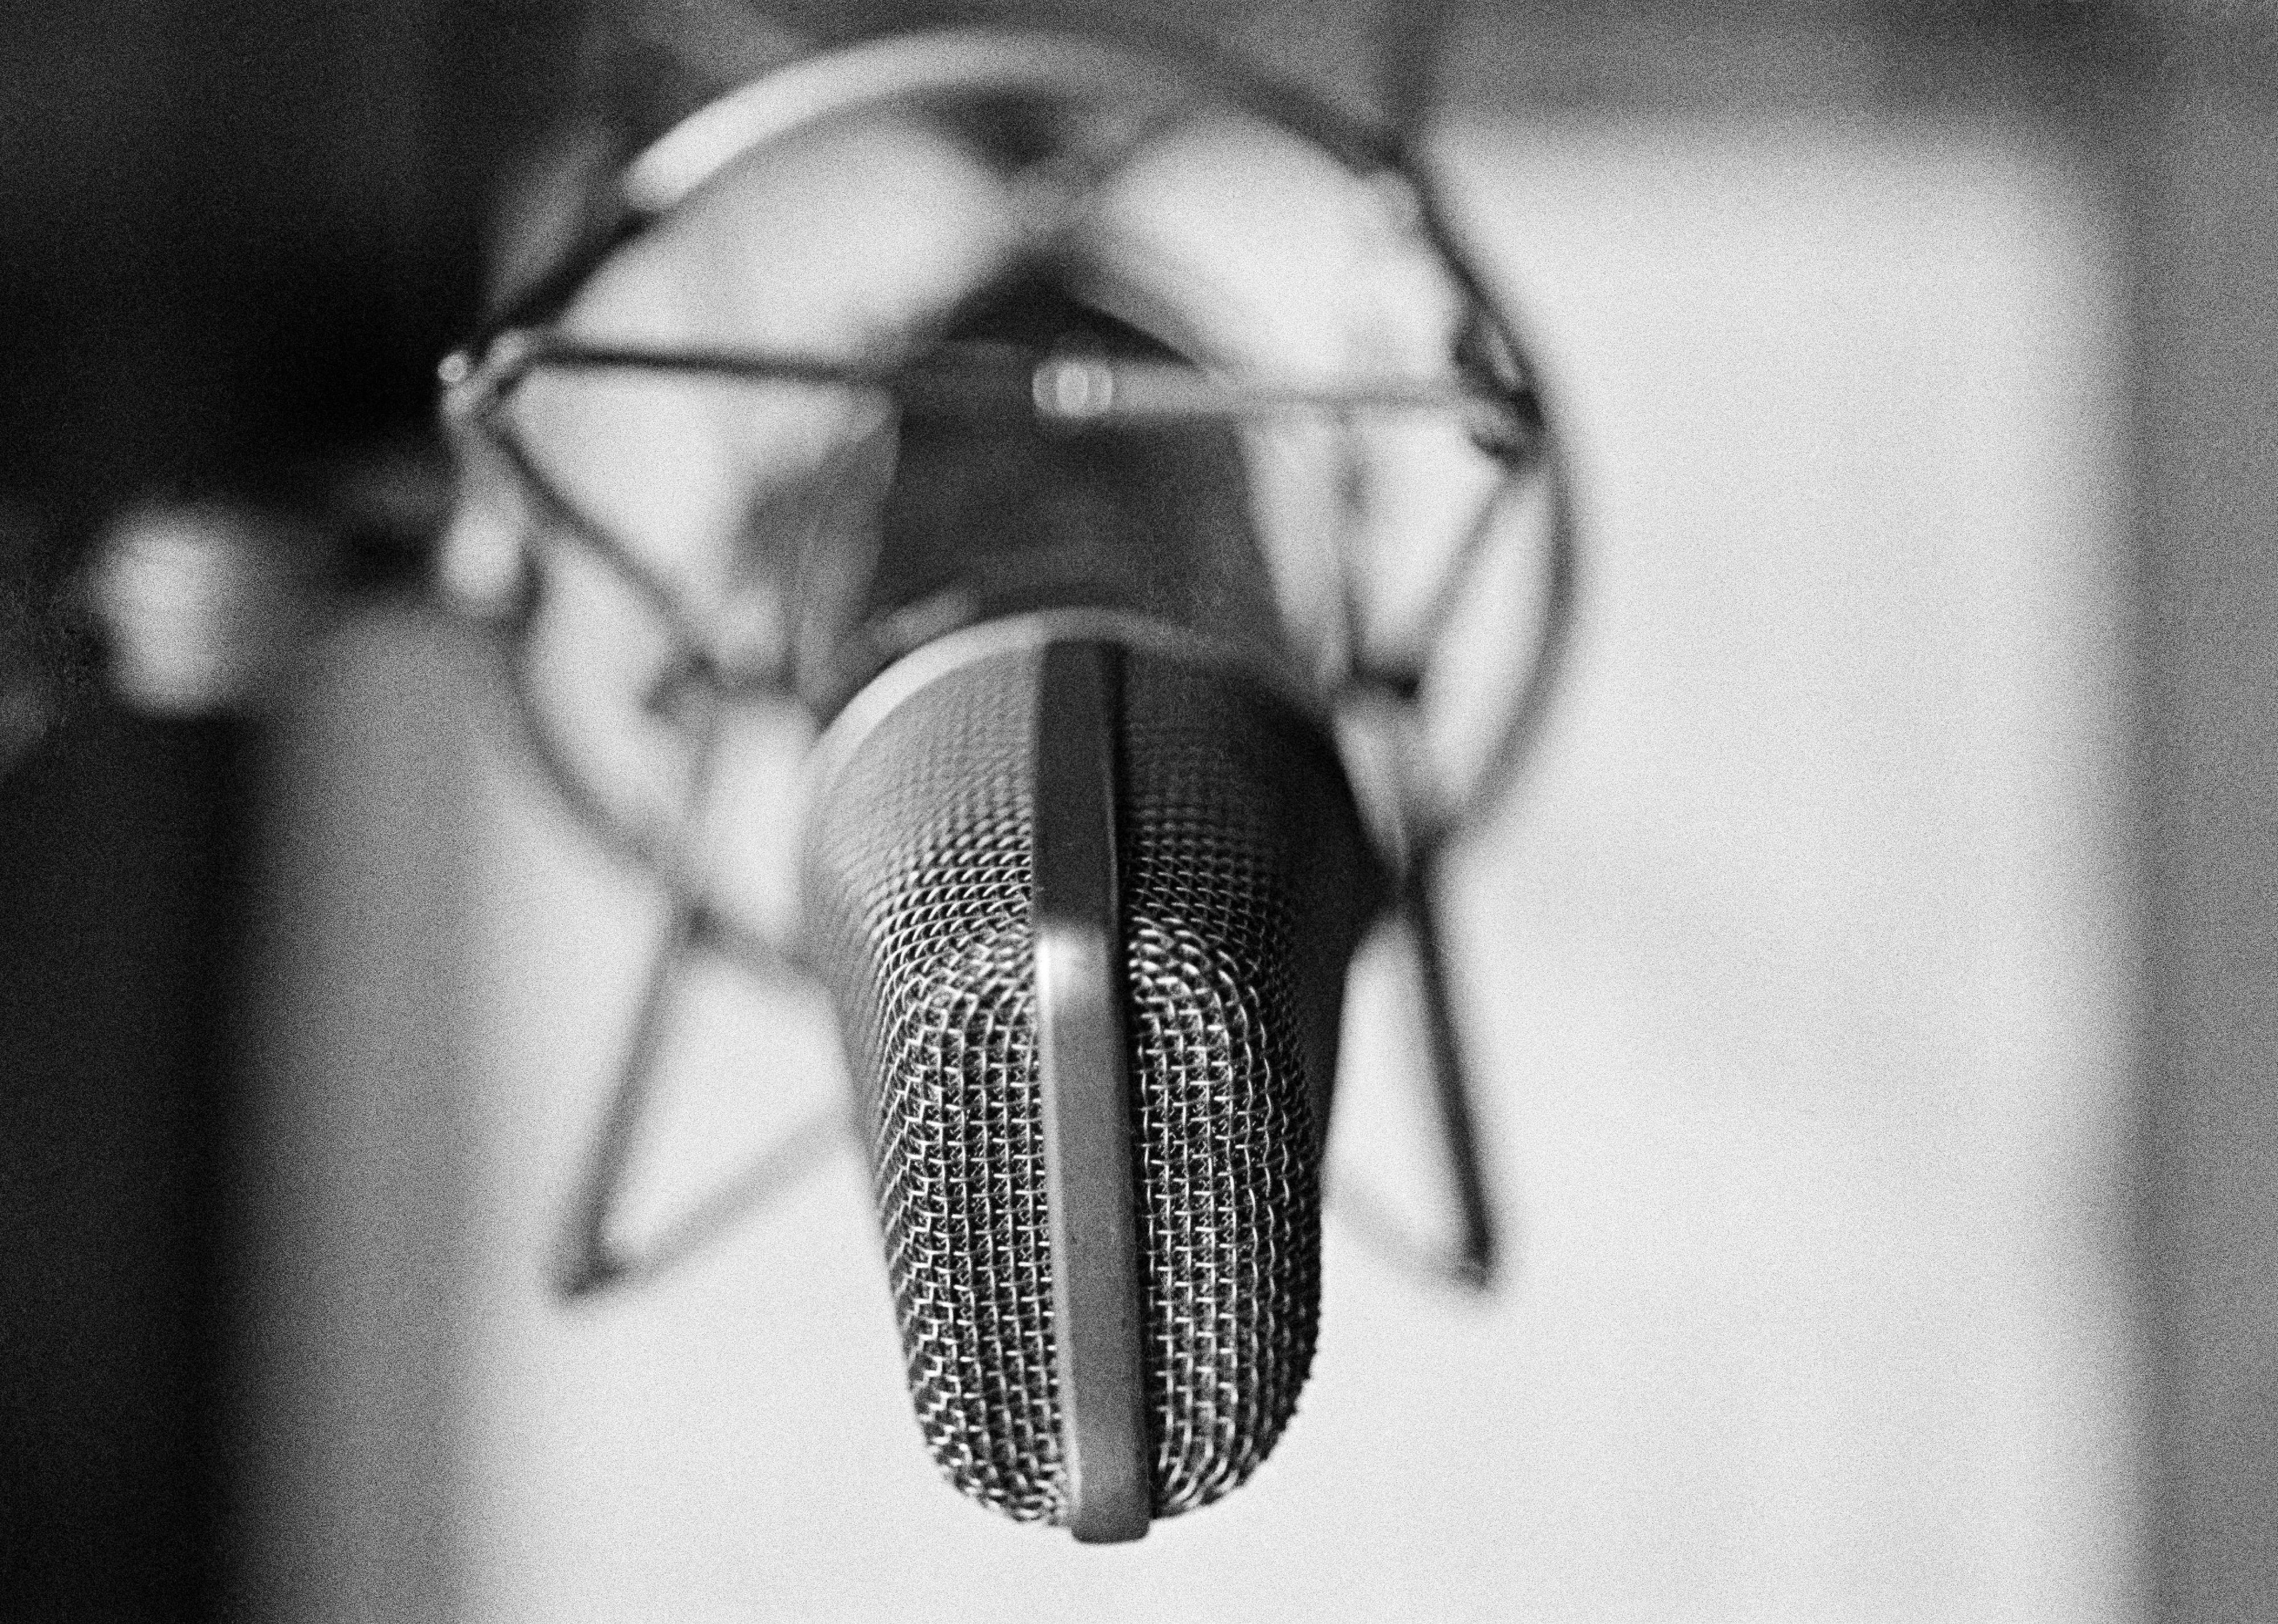 General view of a condenser microphone in a shock mount in a recording studio.